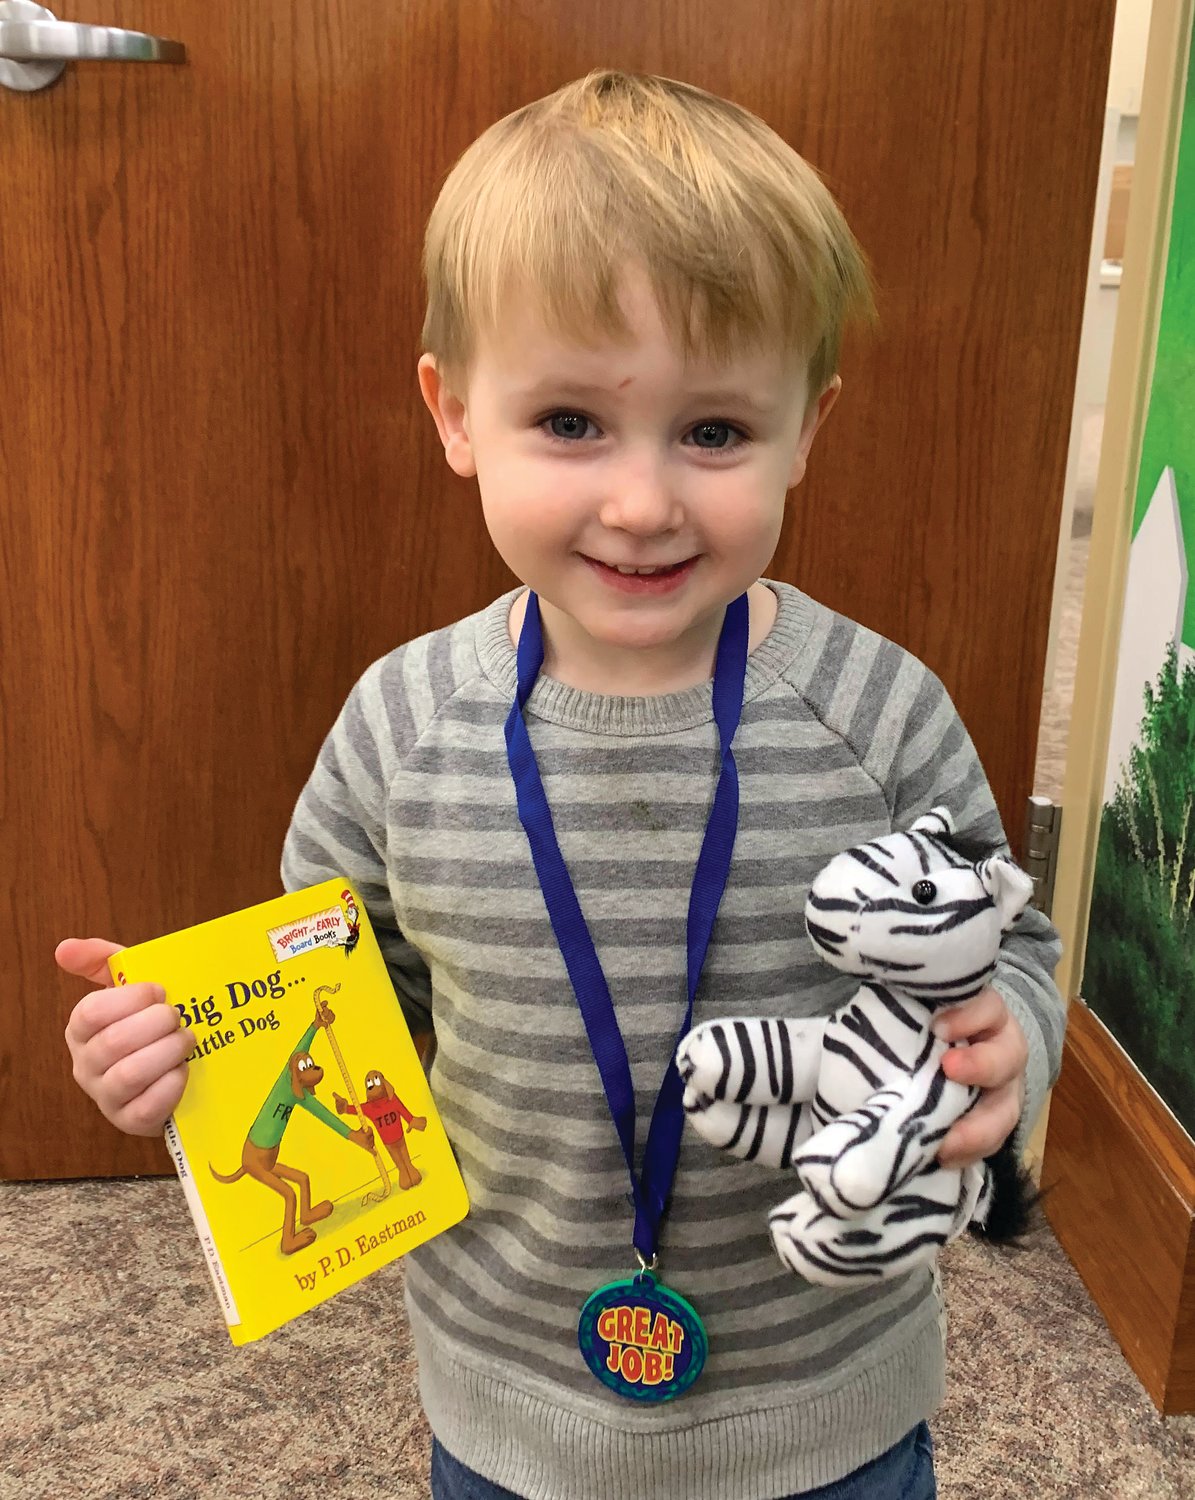 Tommy Smillie, age 2 1/2, has completed the 1,000 Books Before Kindergarten at the Crawfordsville District Public Library. He is the son of John Smillie and Katie Ansaldi. His favorite book is "The Very Hungry Caterpillar"by Eric Carle. Mom said, "Reading the 1,000 books has been a special part of our family's day. We love coming to the library and checking out new books!"